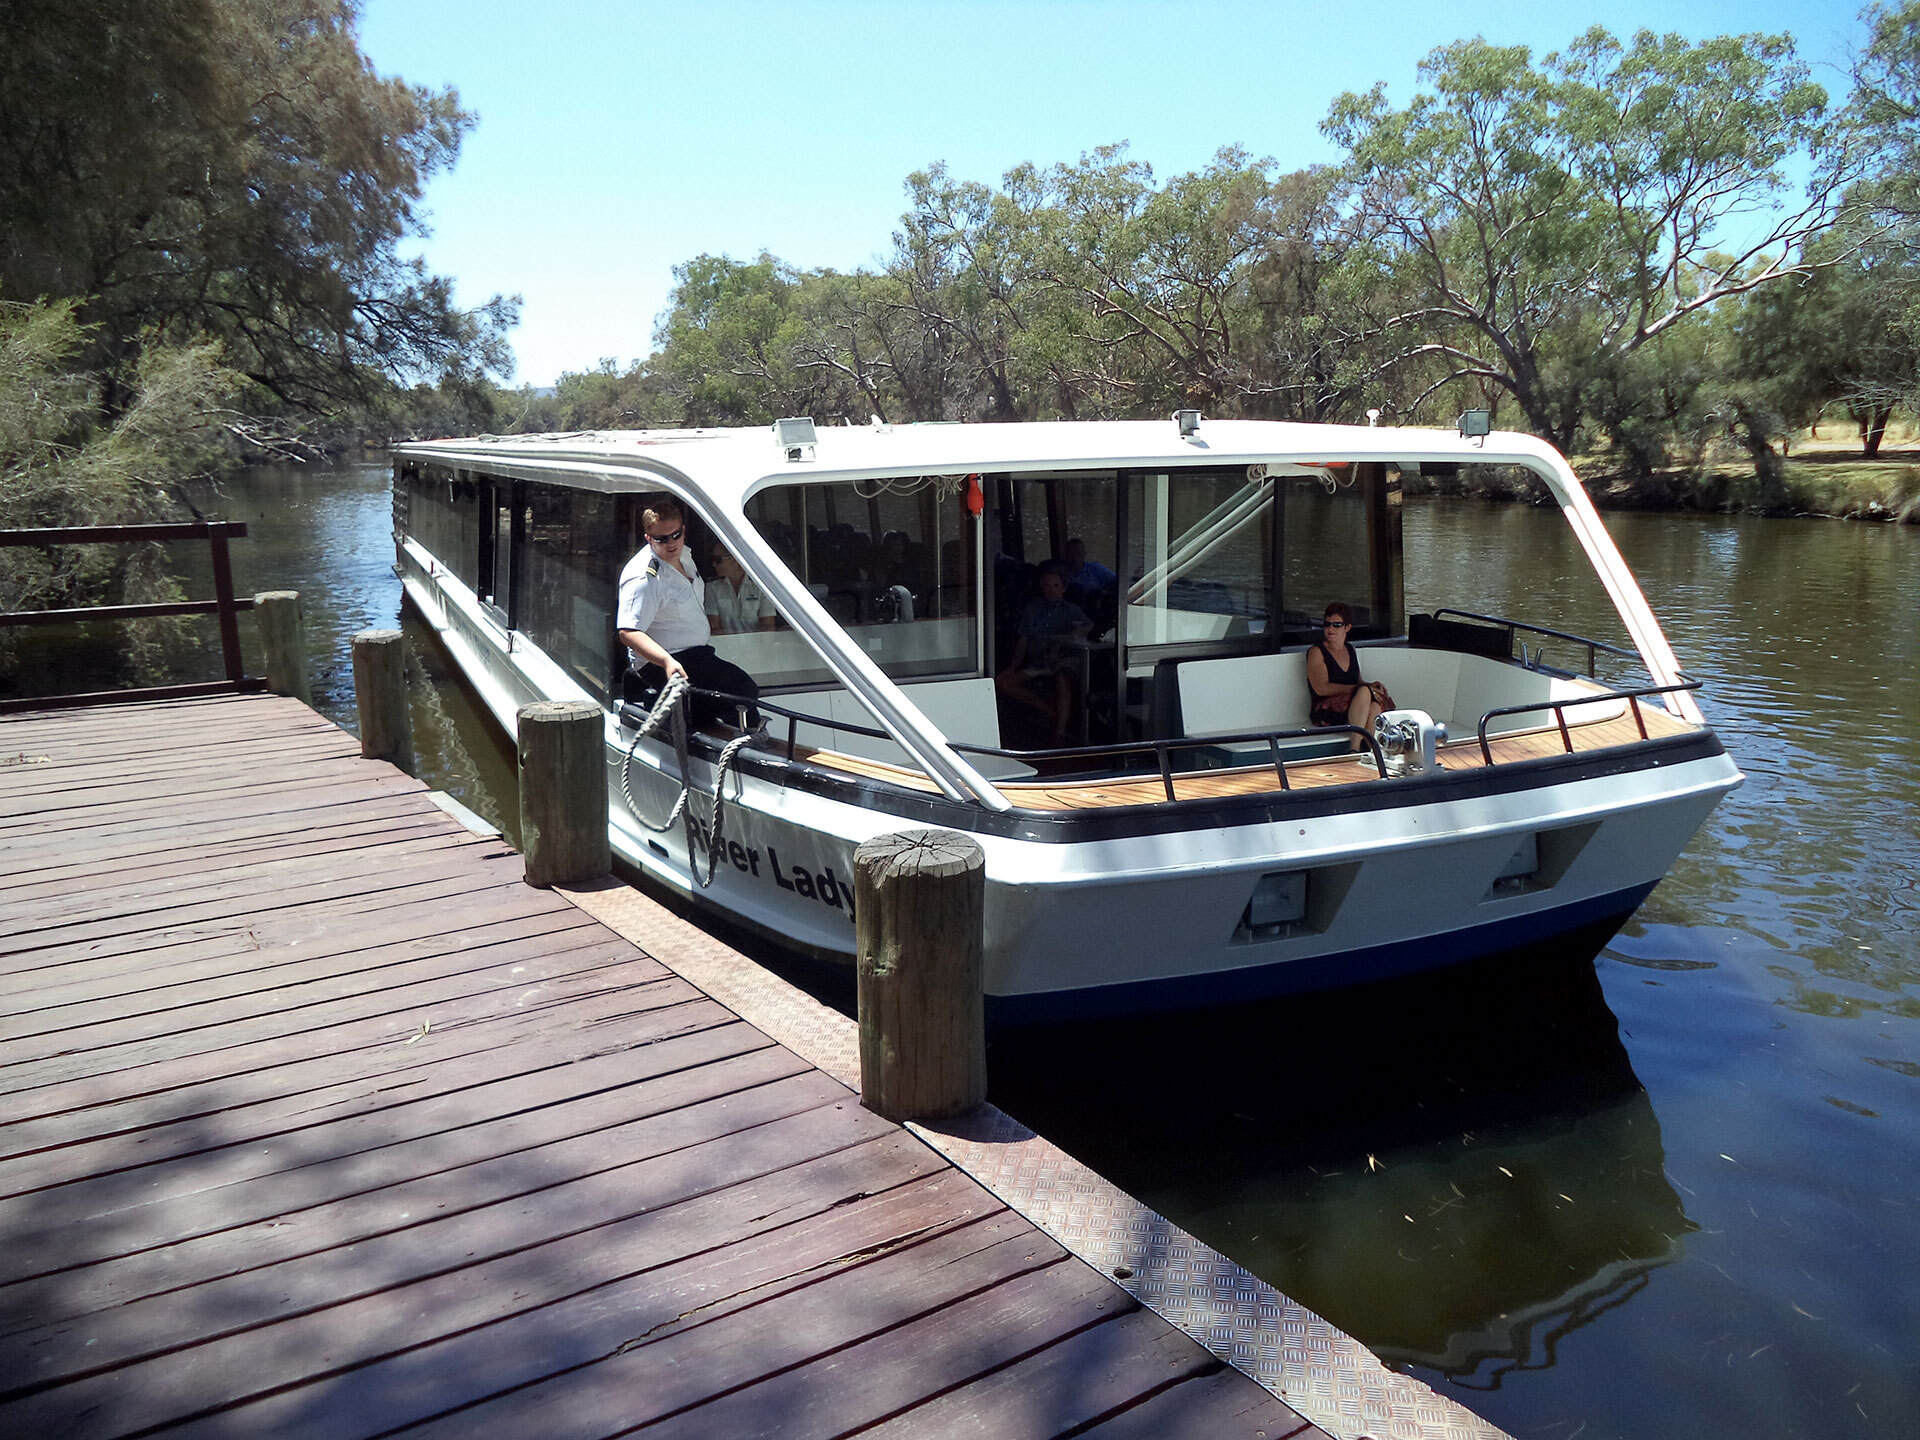 Docking at Sandalford Jetty